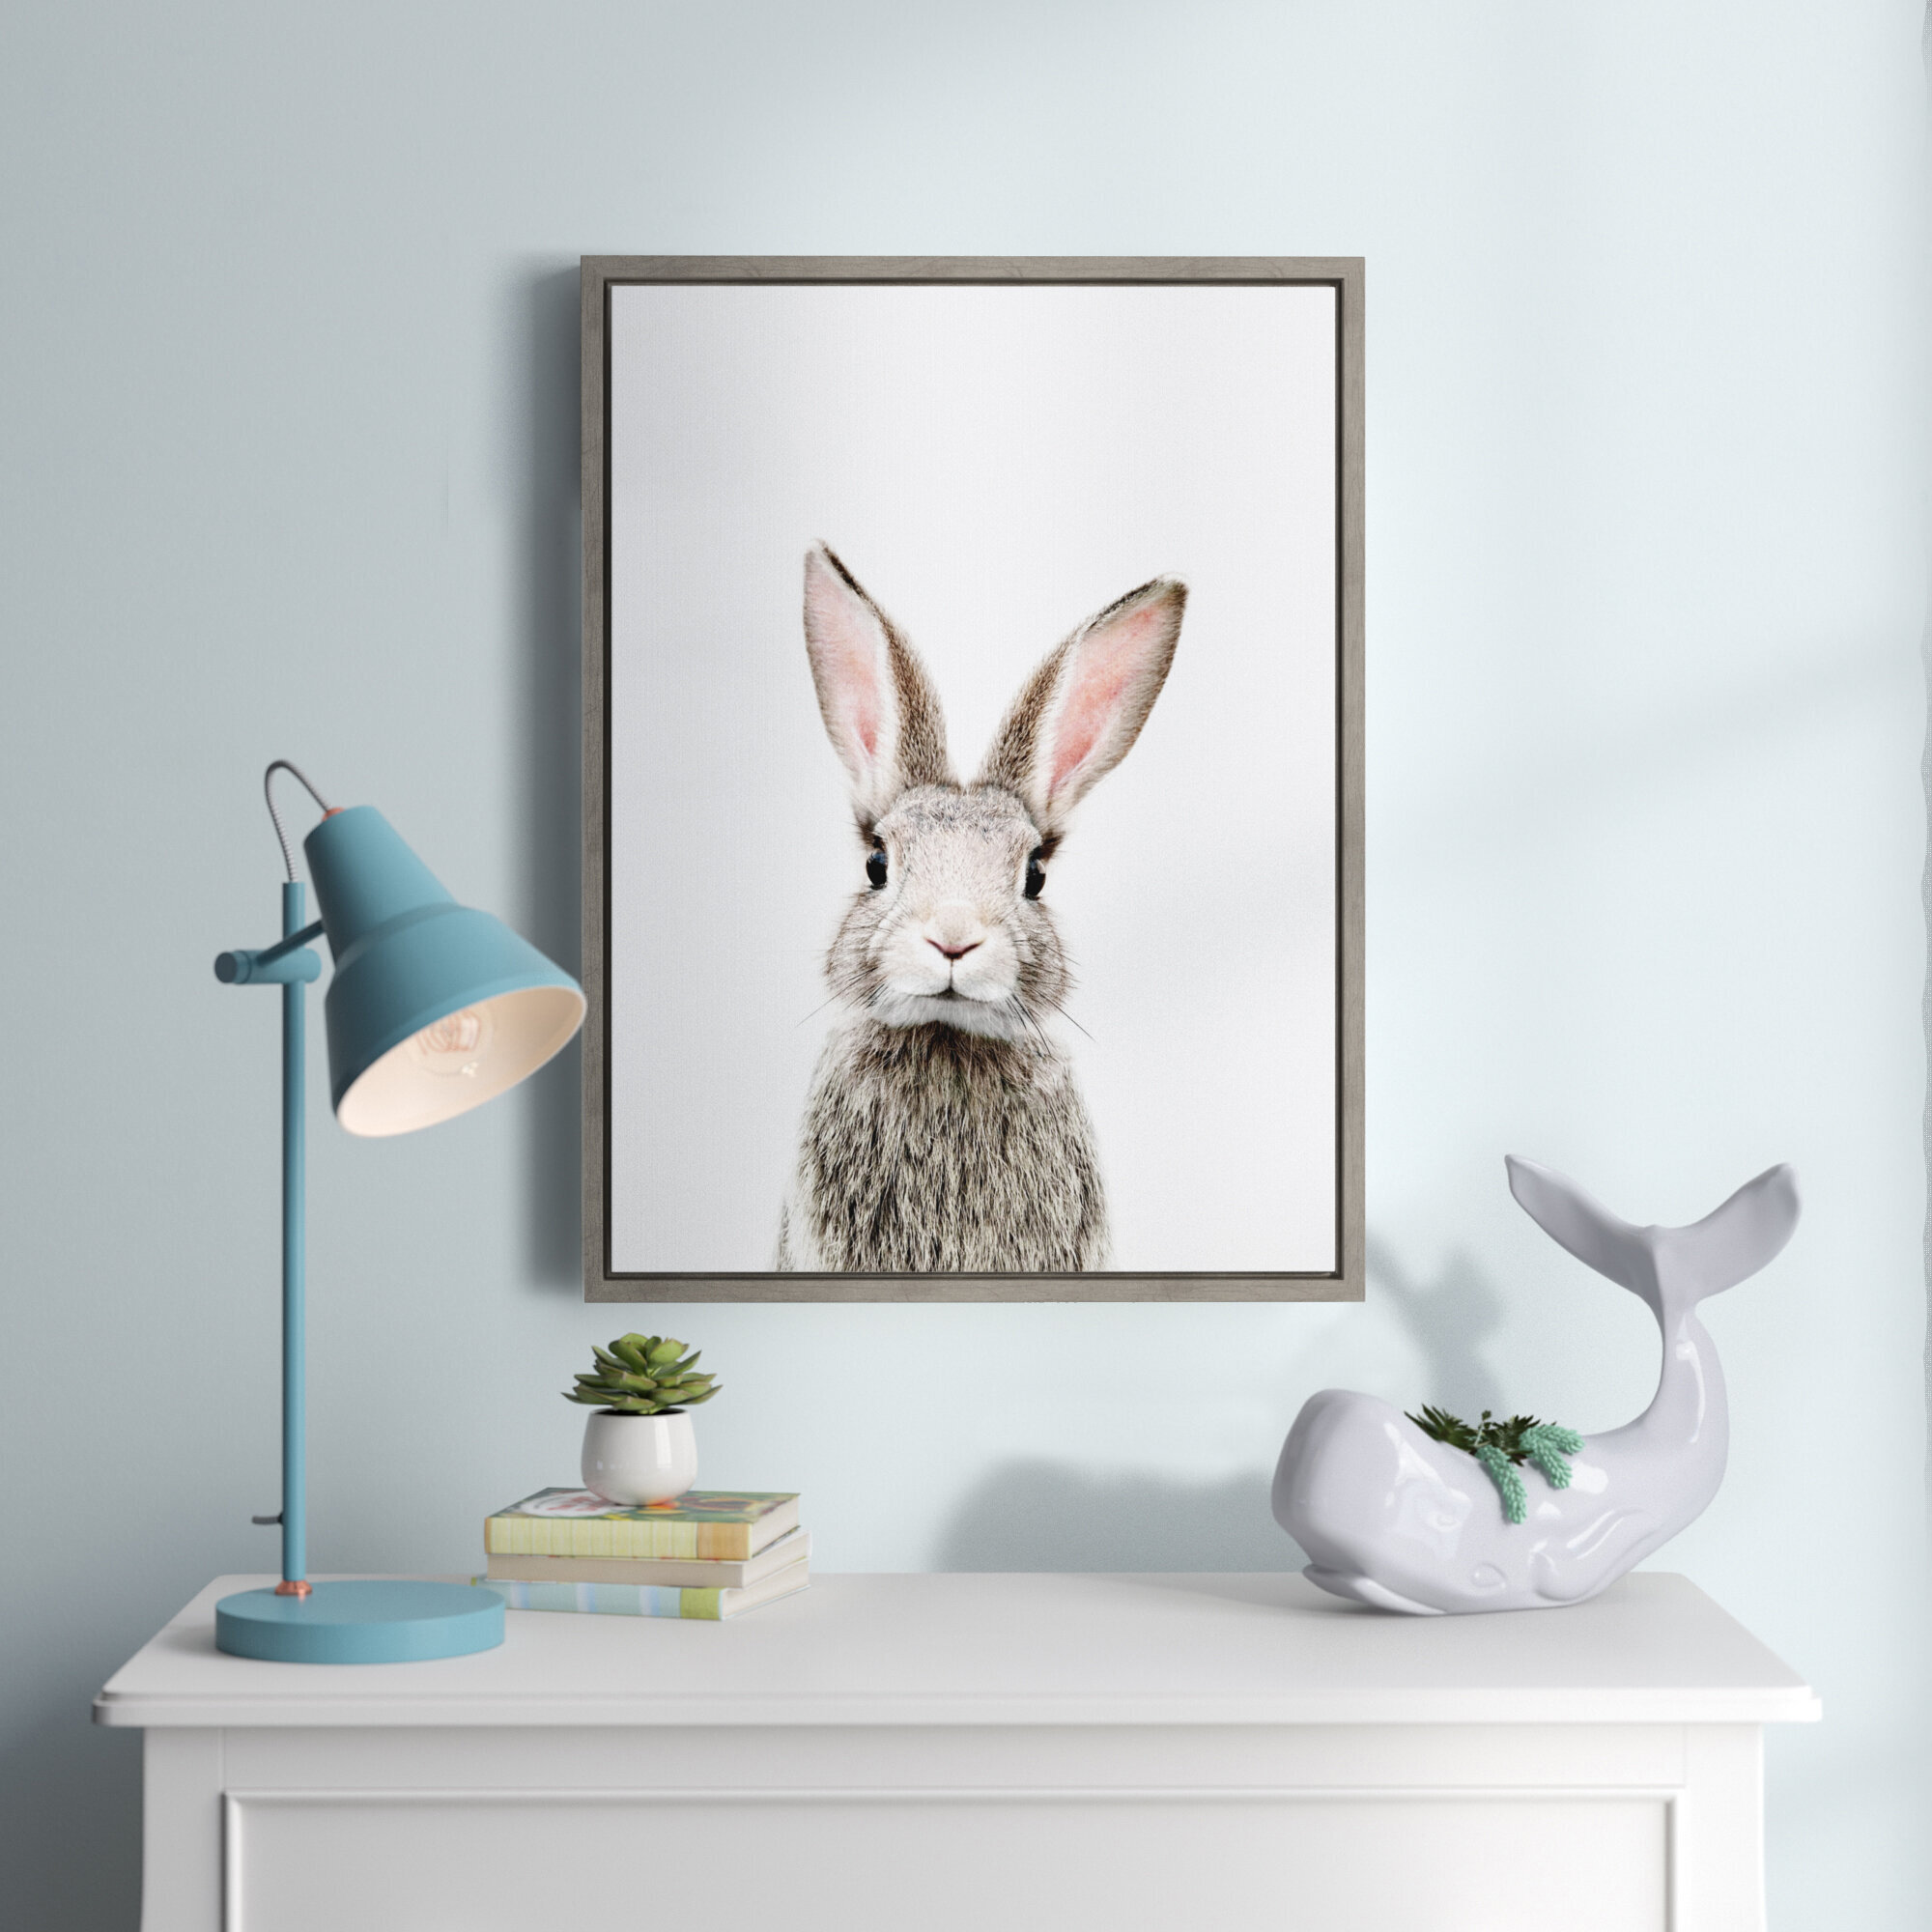 Harriet Bee Kate And Laurel Sylvie Female Baby Bunny Rabbit Animal Print Portrait Framed Canvas Wall Art By Amy Peterson Grey 18 X 24 Reviews Wayfair Ca